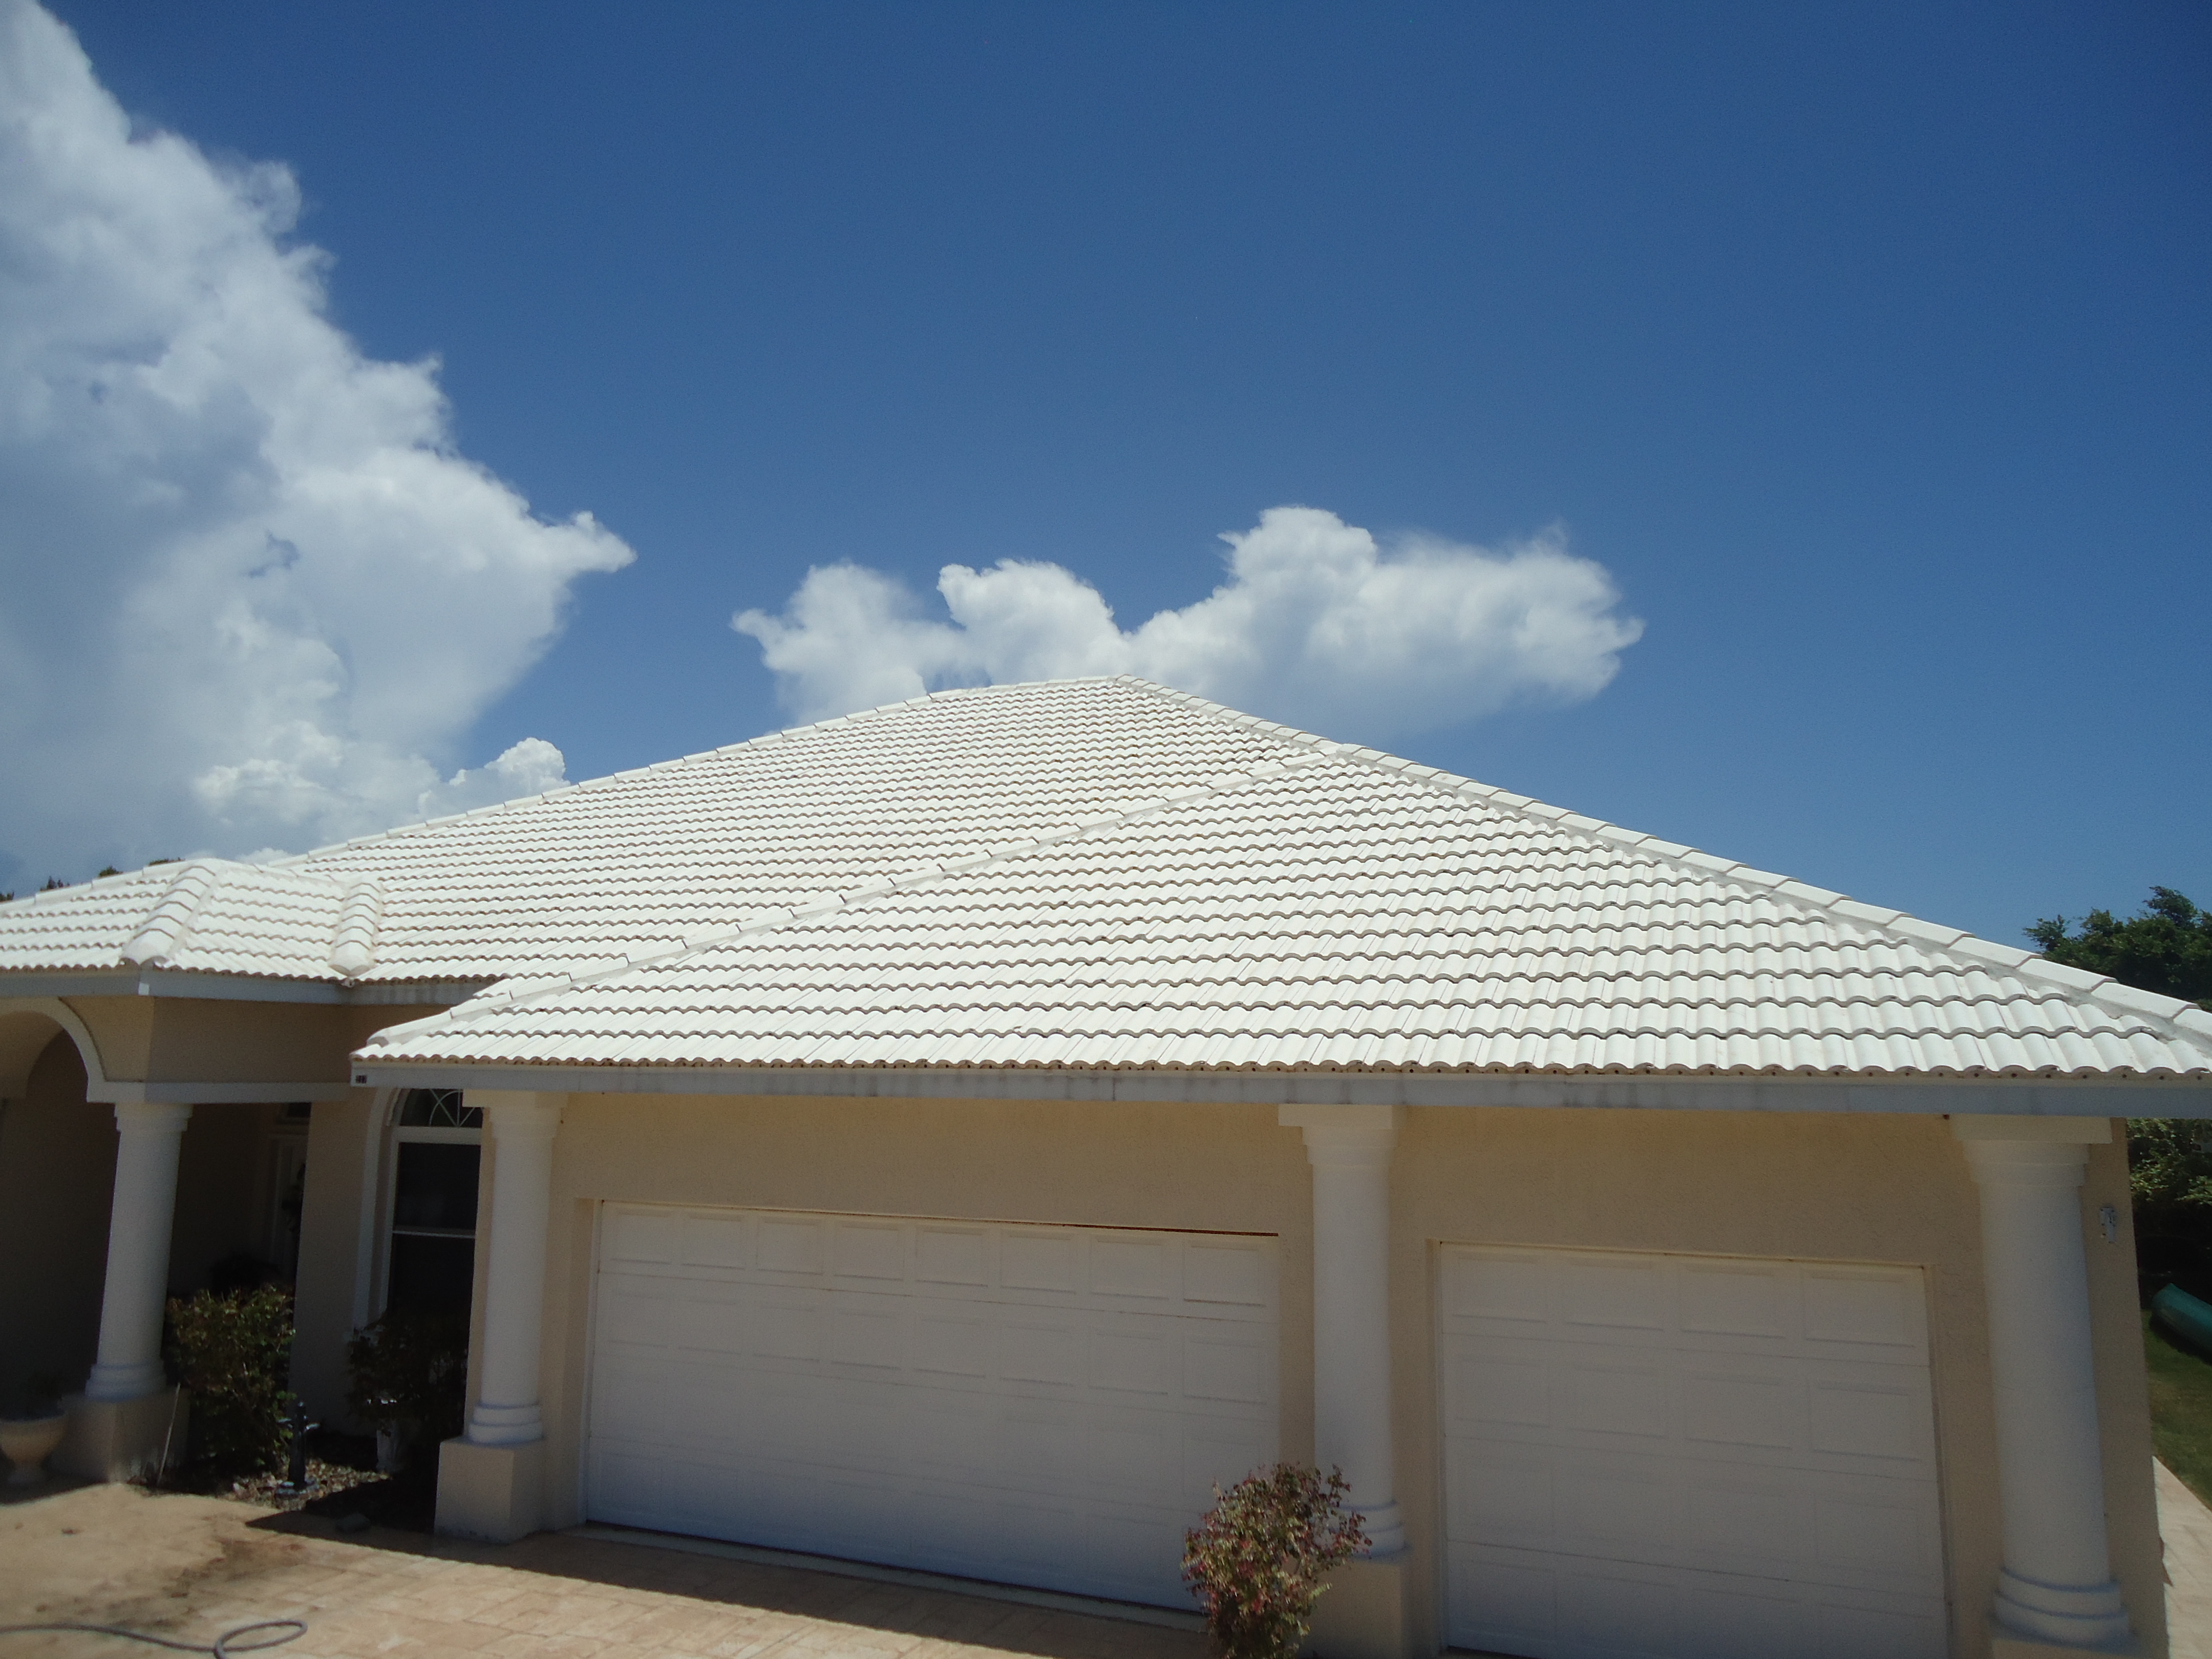 Tile Roof Cleaning Venice, FL